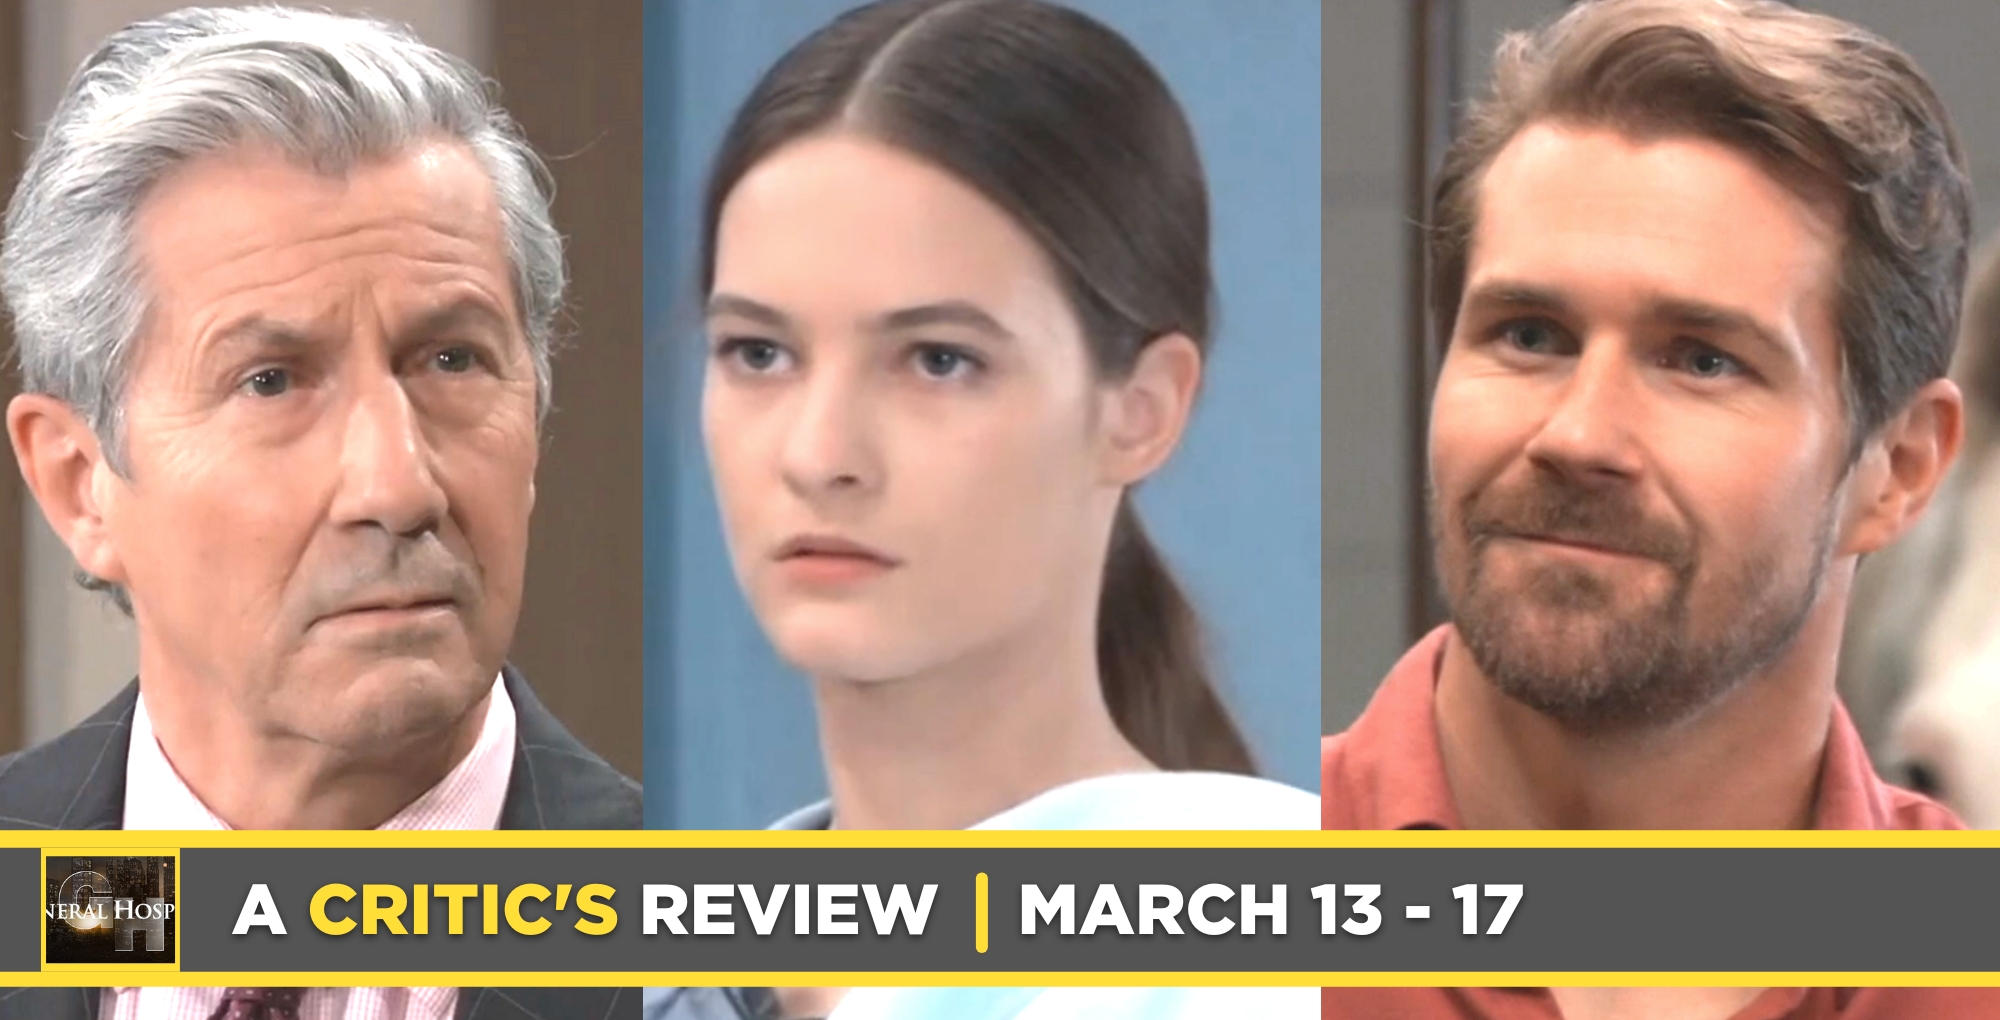 general hospital critic's review for march 13 – march 17, 2023,, three images victor, esme, cody